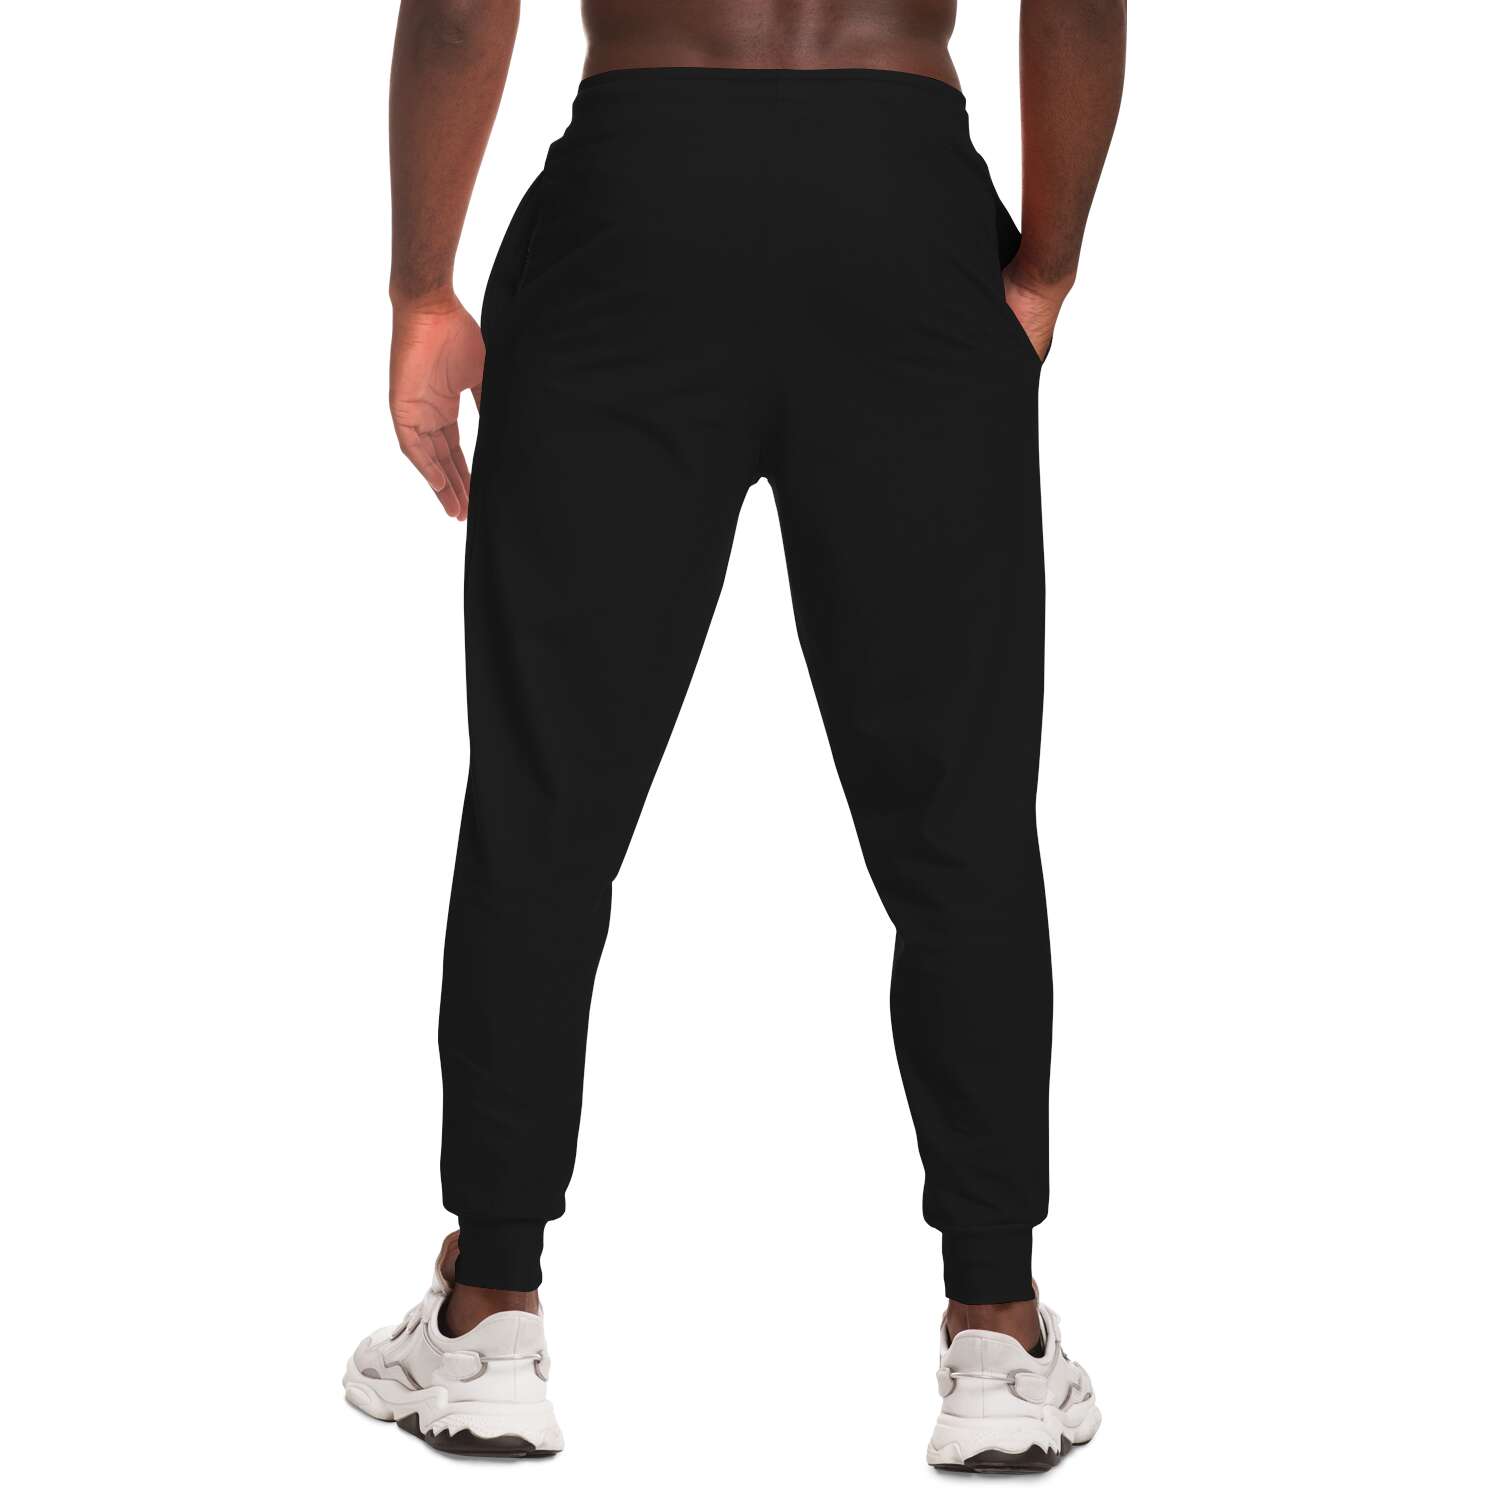 Italy DNA Flag Joggers